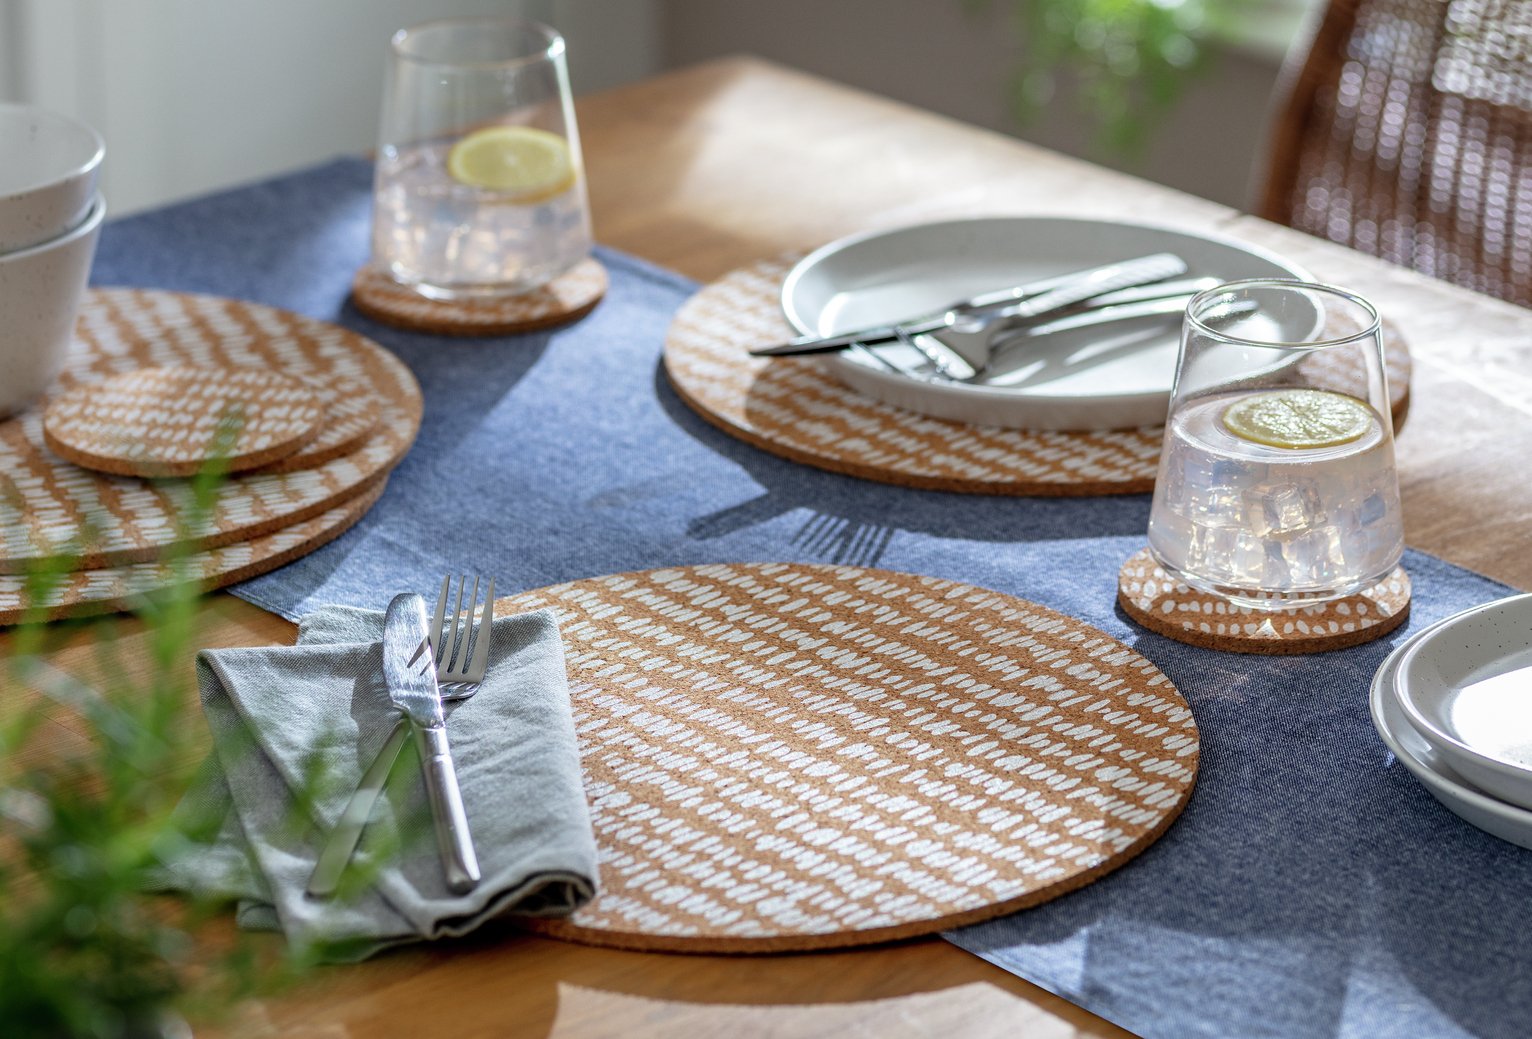 Habitat Printed Cork Placemats and Coasters